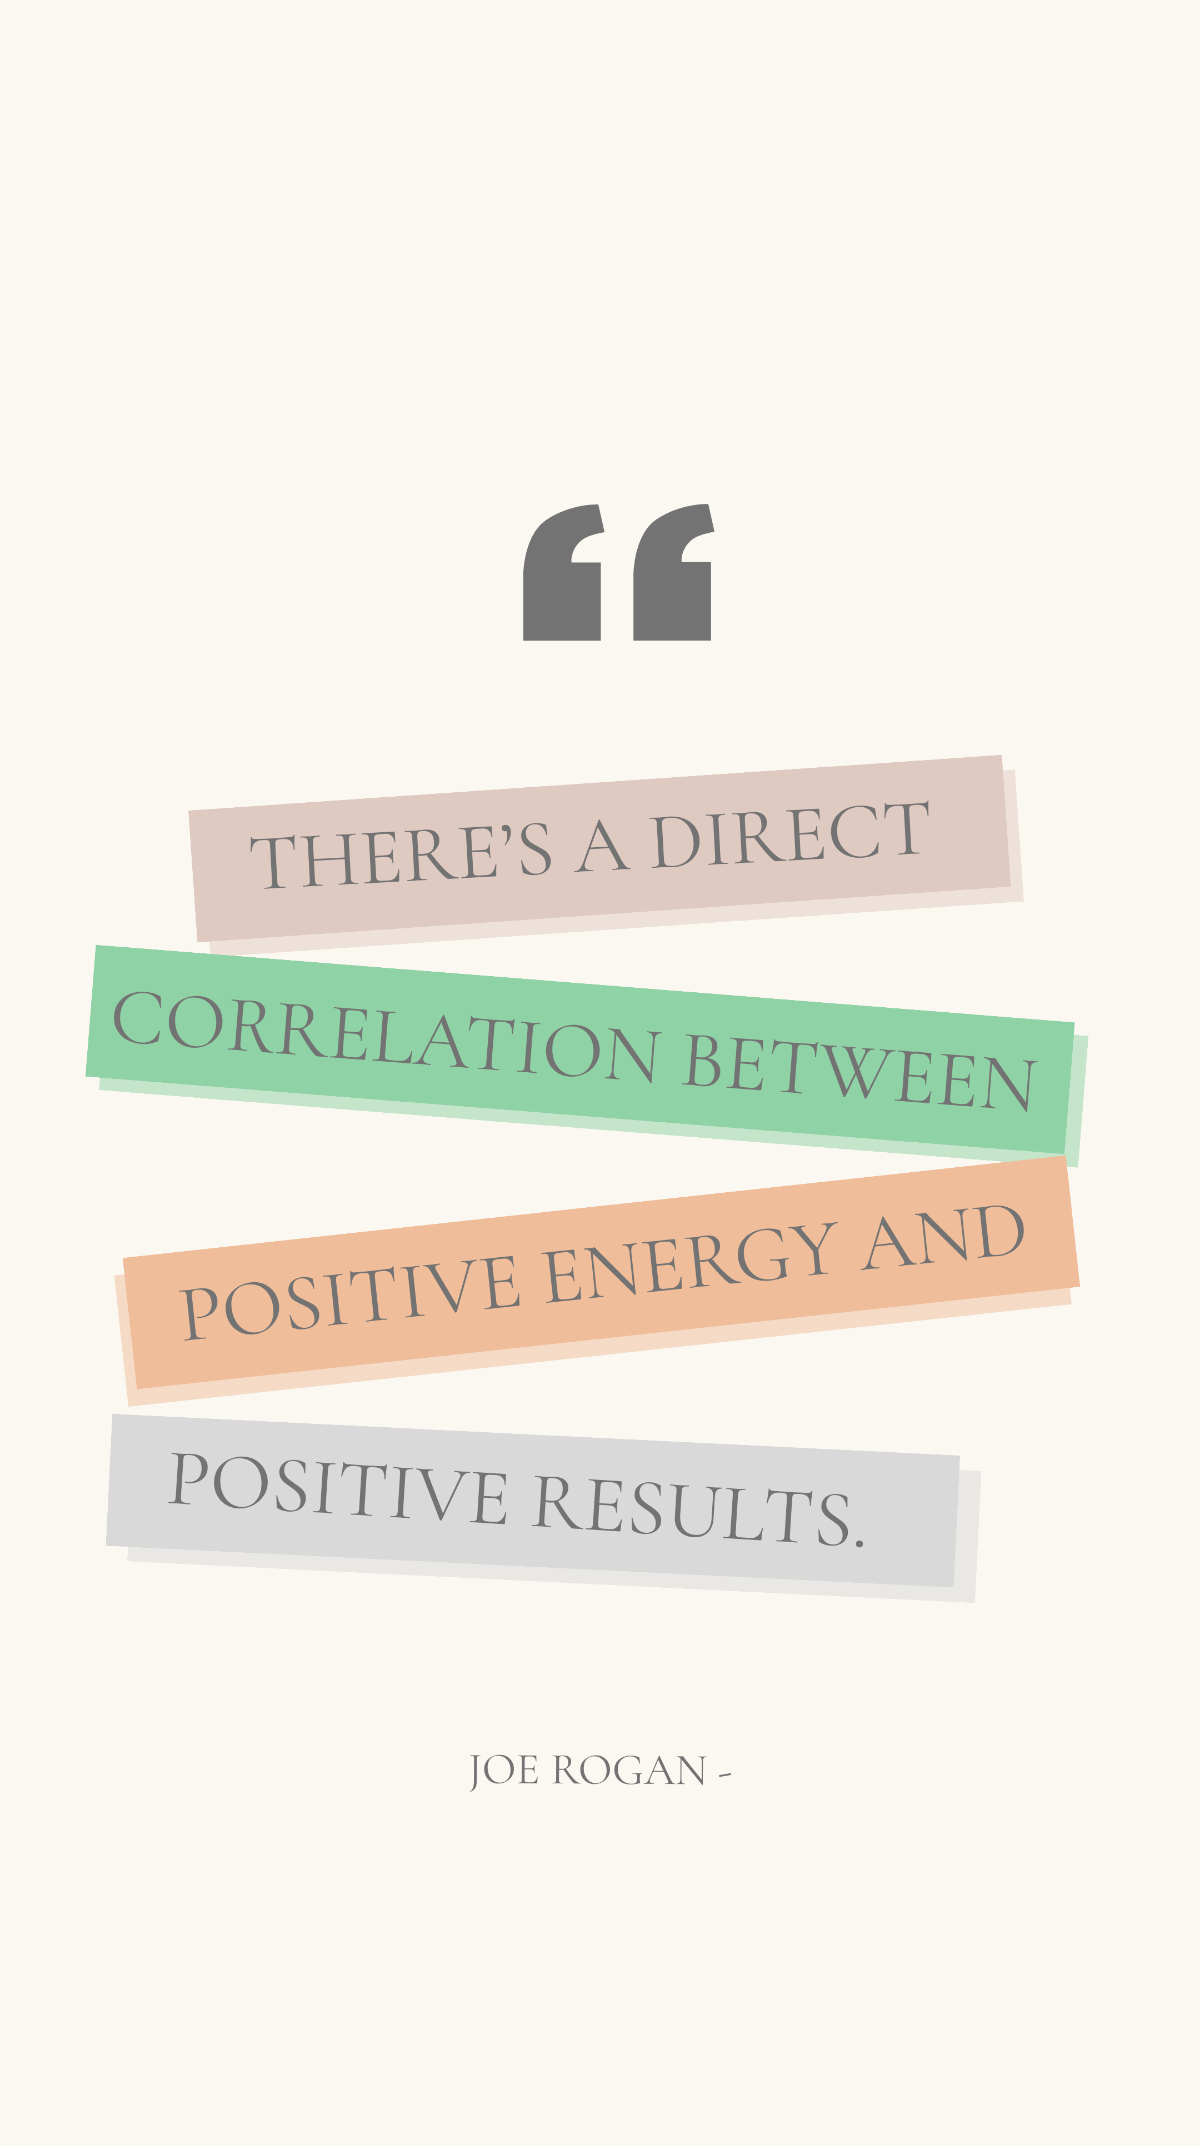 Joe Rogan - There’s a direct correlation between positive energy and positive results. Template